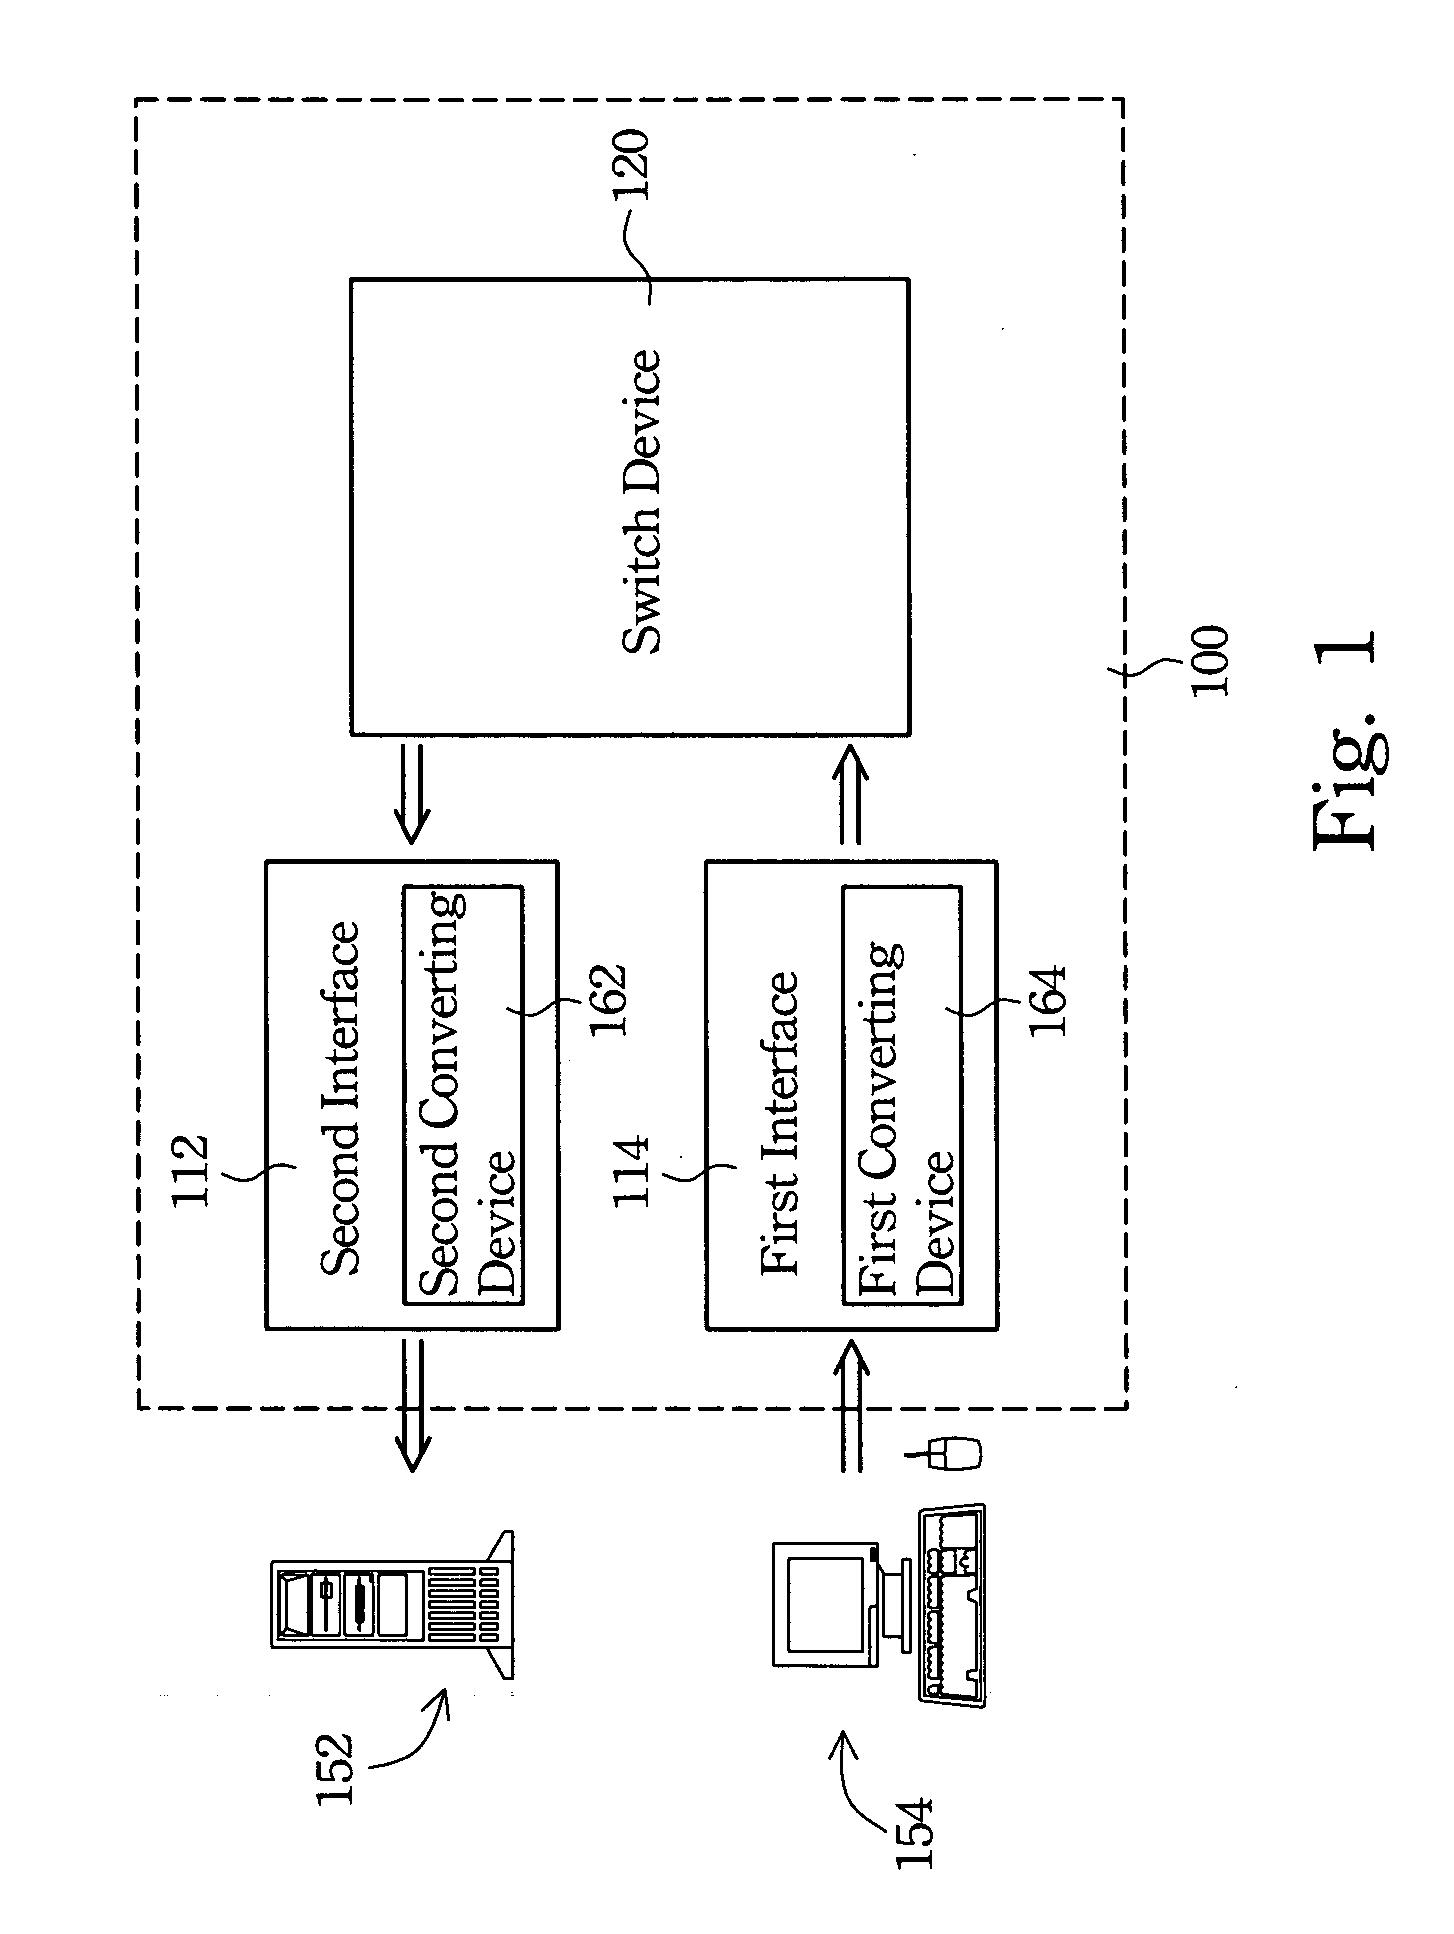 Keyboard video mouse switch and the method thereof